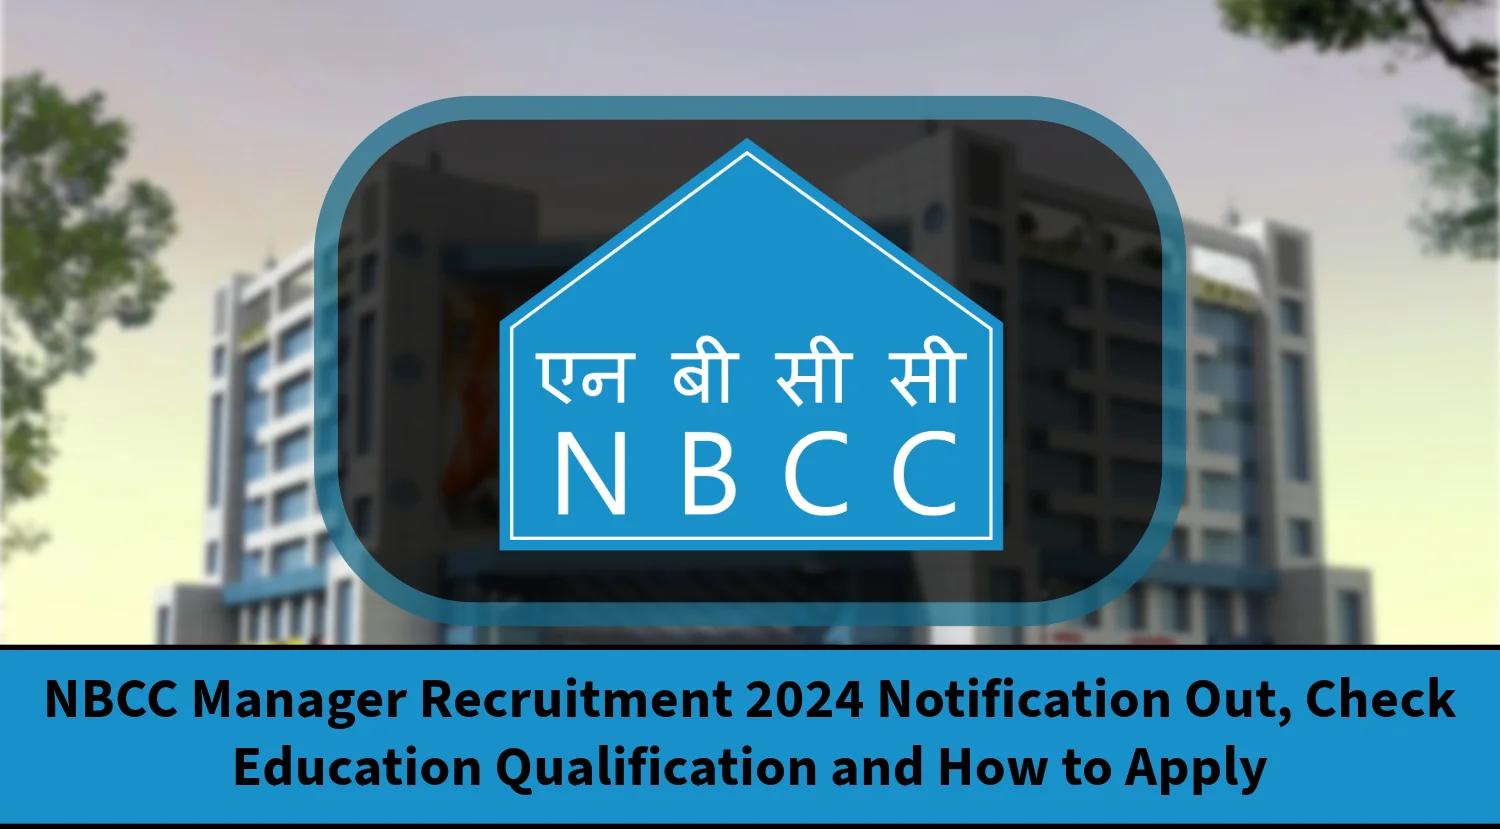 NBCC Manager Recruitment 2024 Notification Out, Check Education Qualification and How to Apply